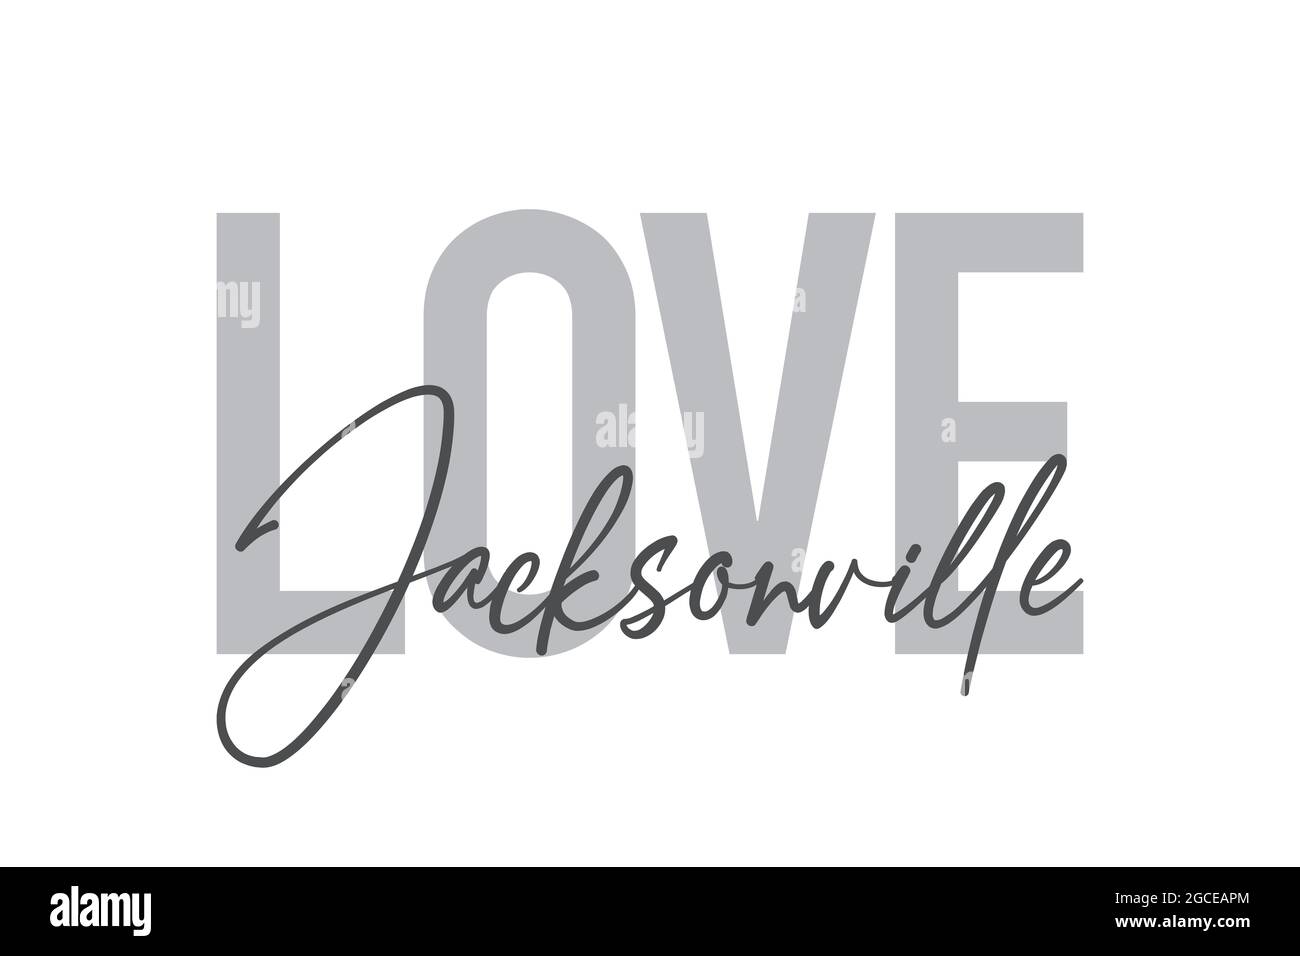 Modern, simple, minimal typographic design of a saying 'Love Jacksonville' in tones of grey color. Cool, urban, trendy and playful graphic vector art Stock Photo